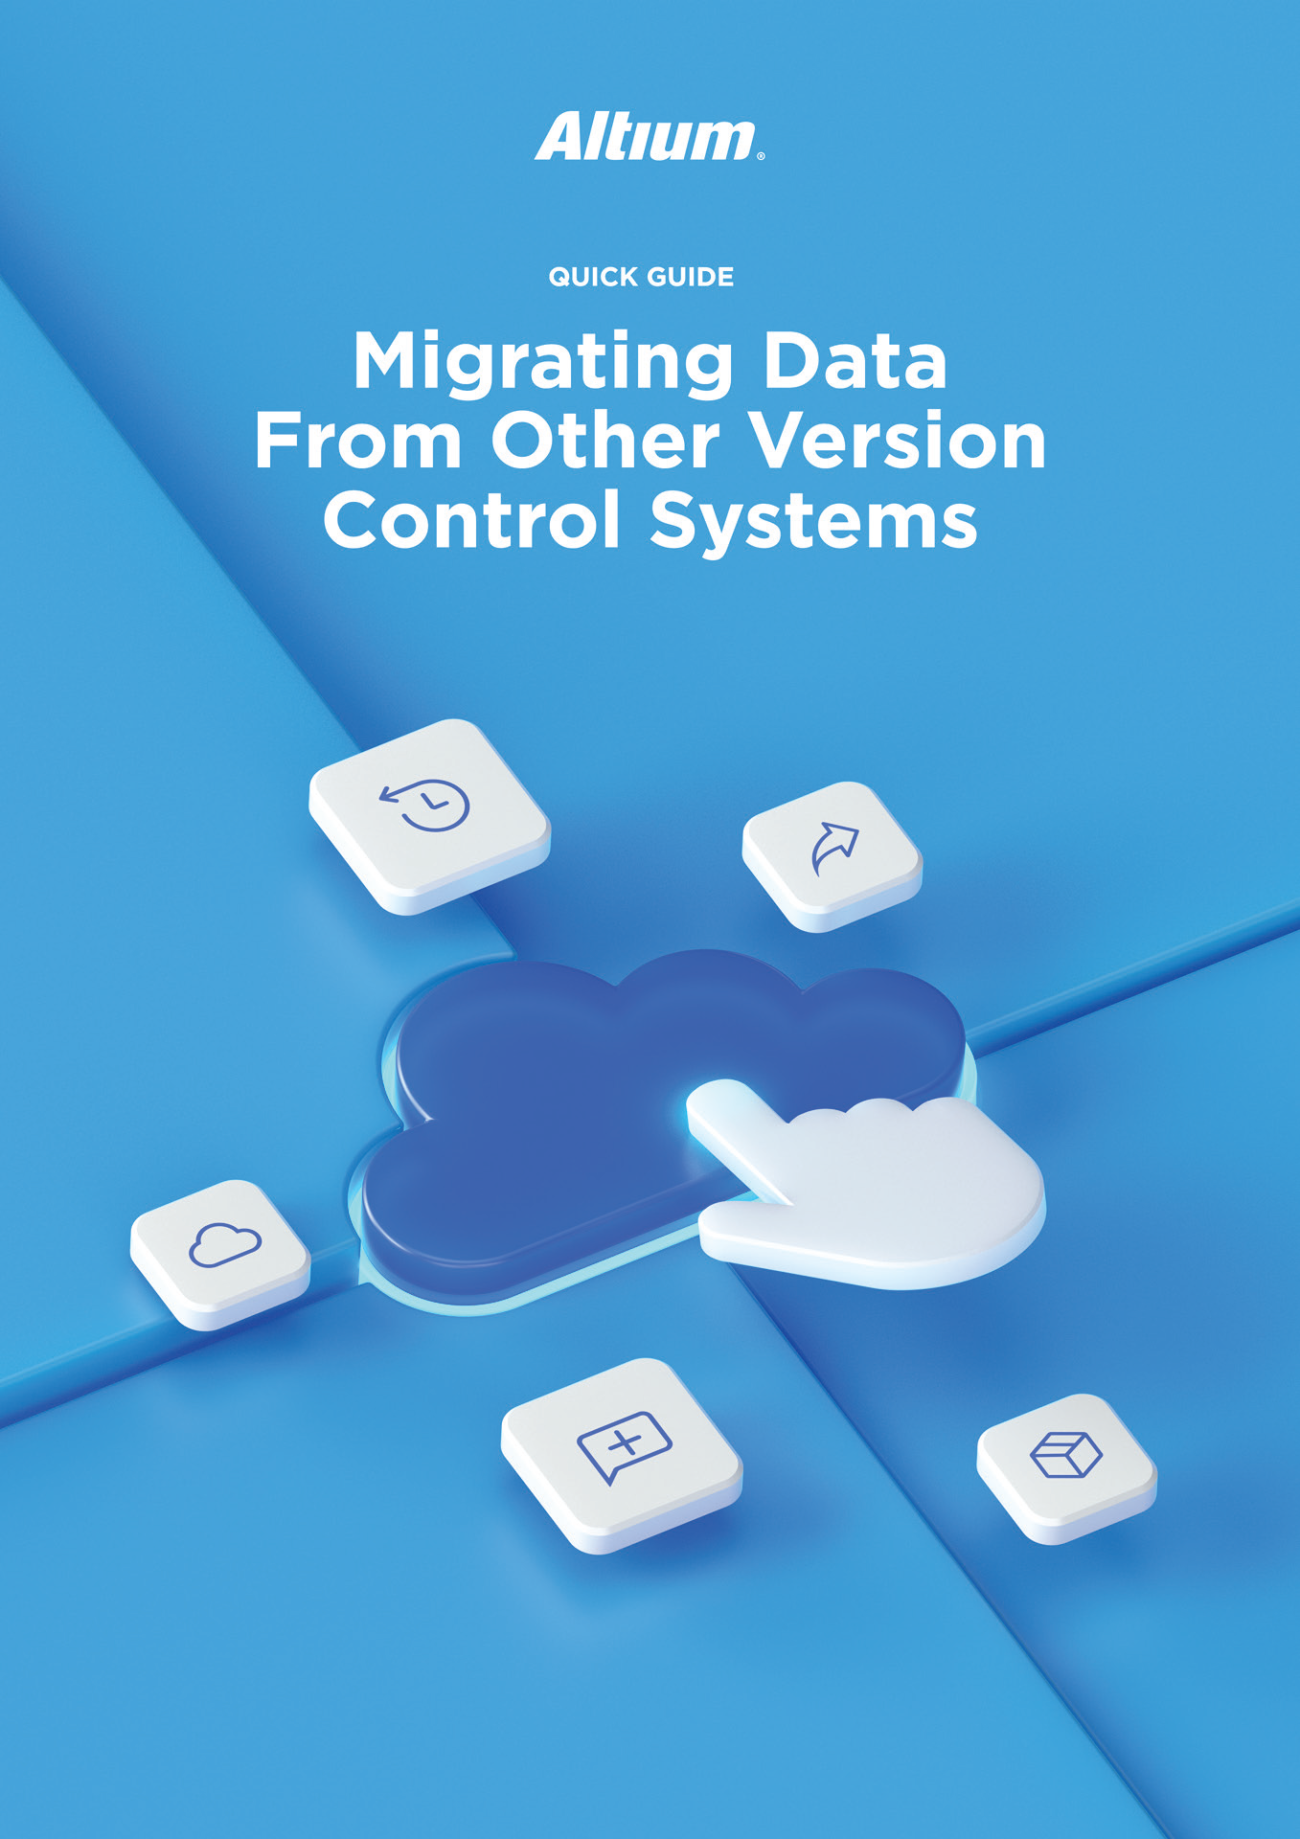 MIGRATING DATA FROM OTHER VERSION CONTROL SYSTEMS